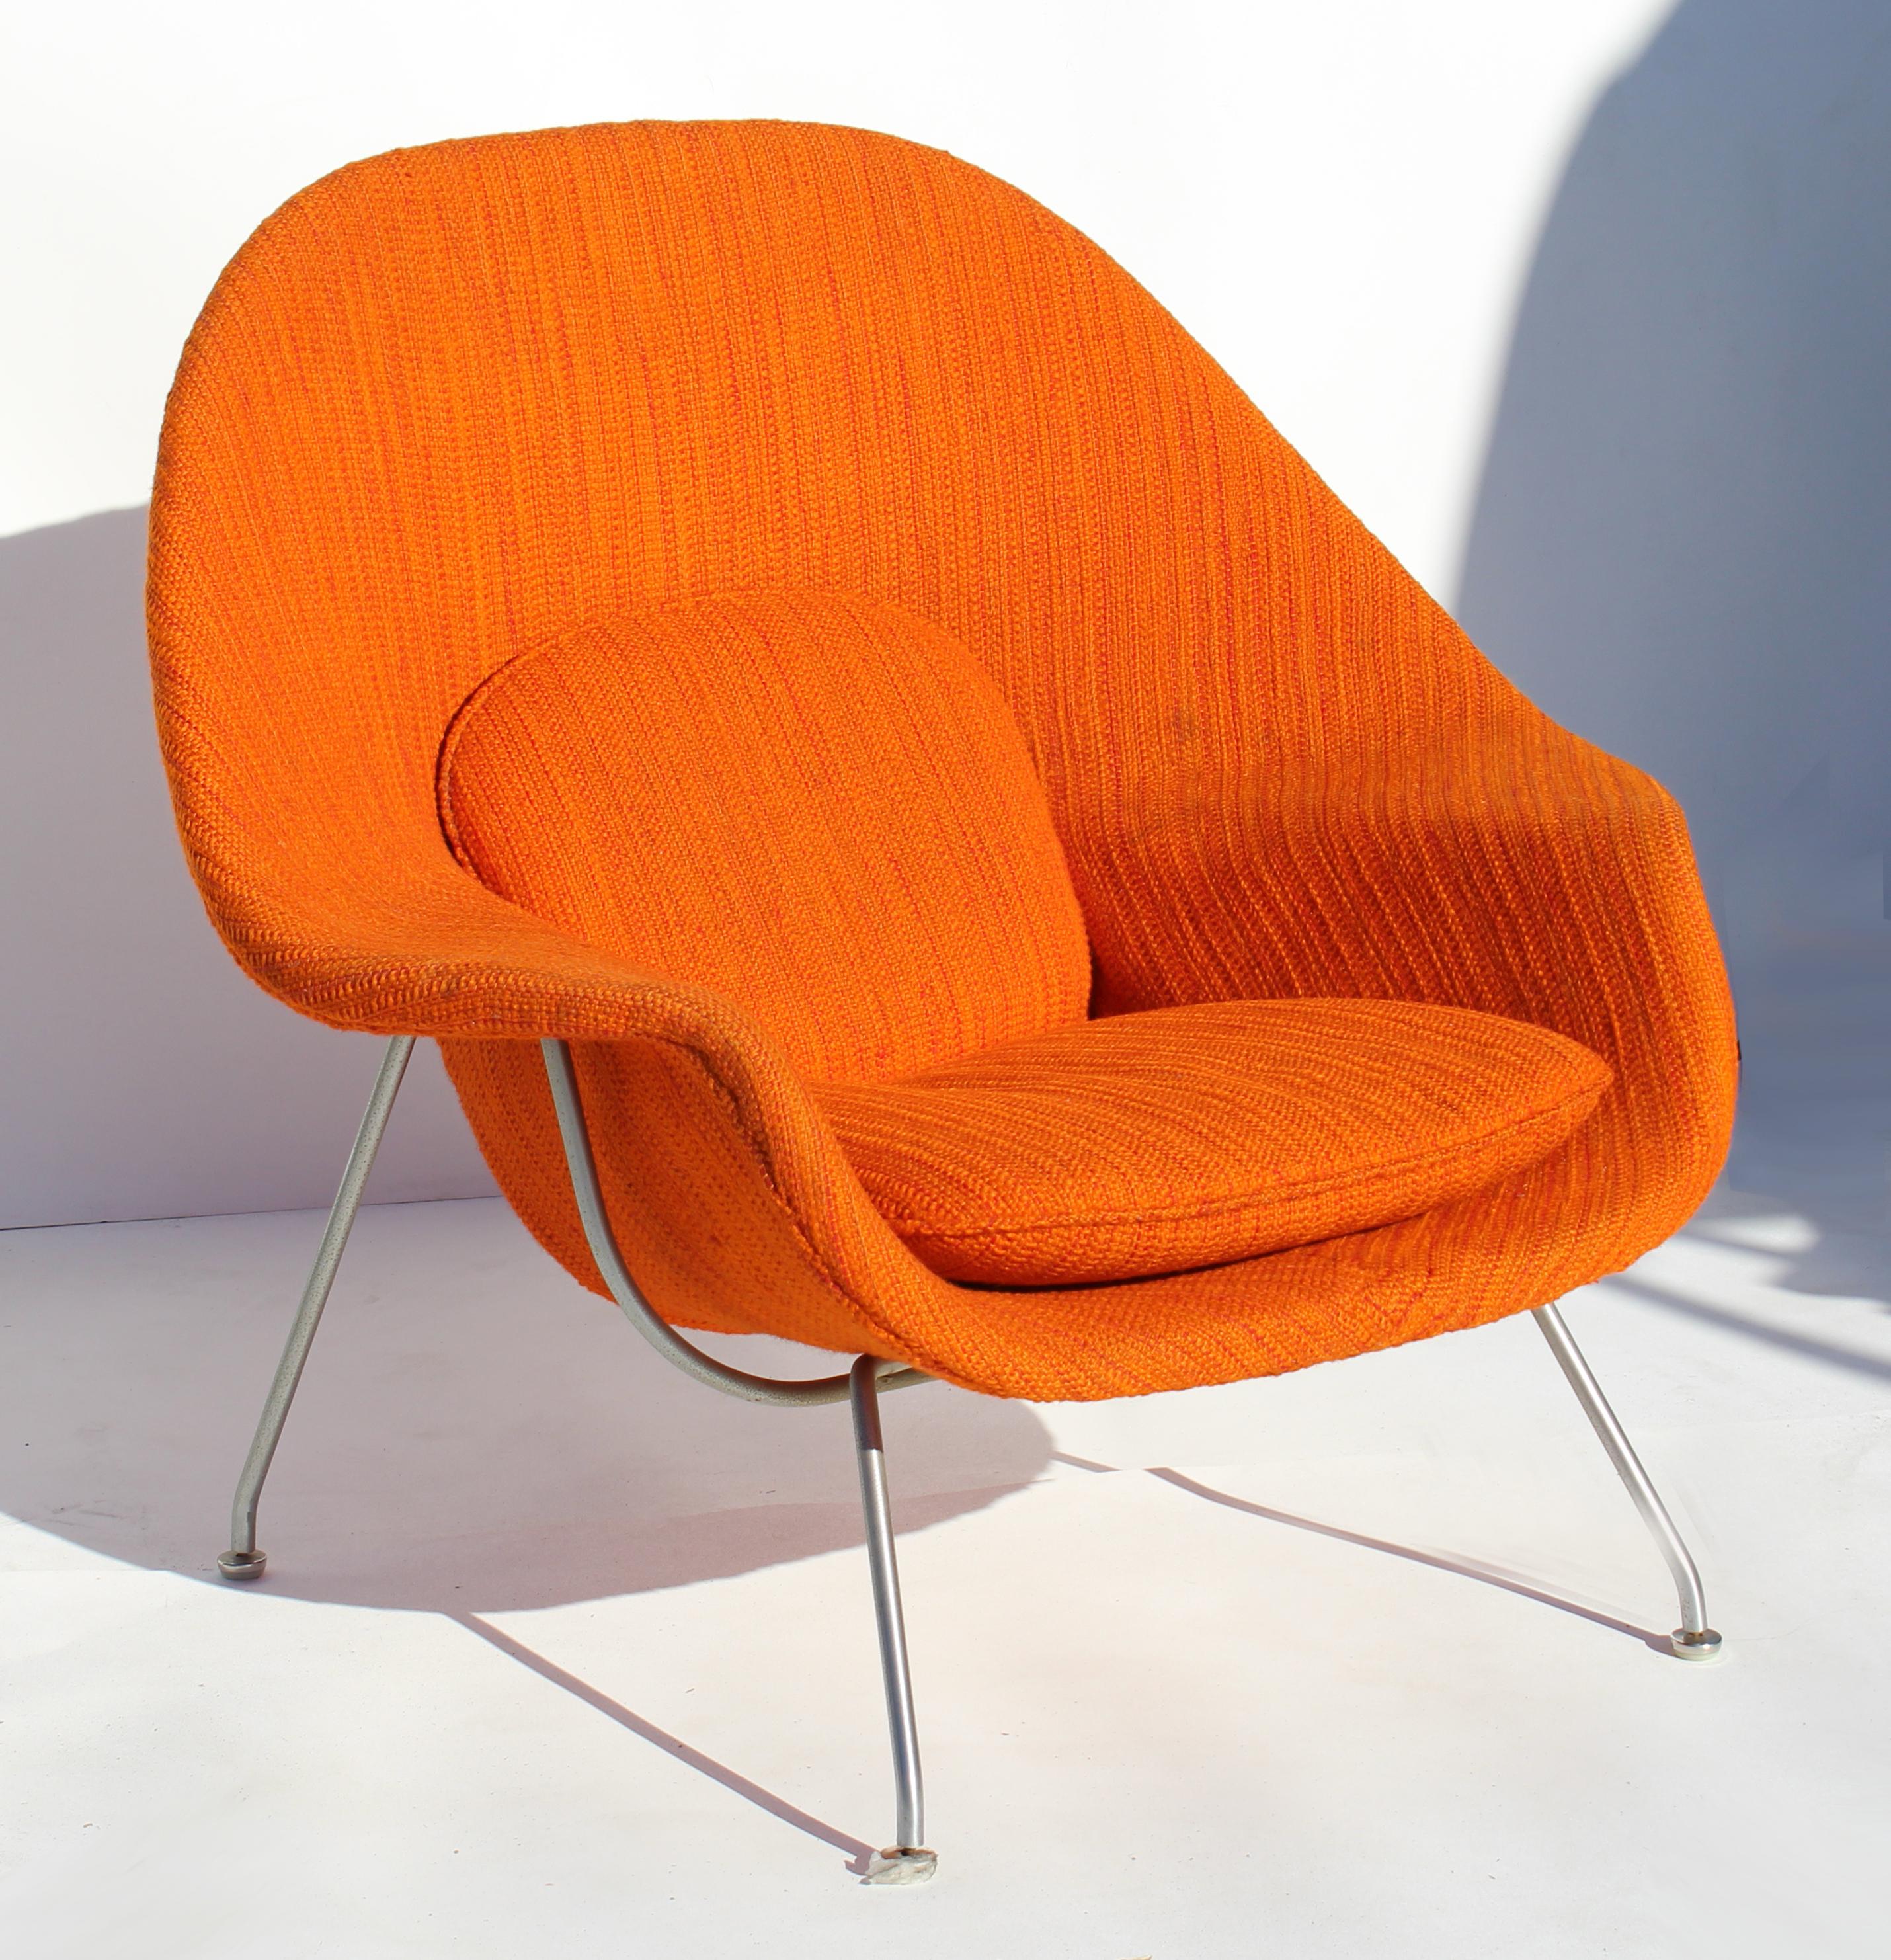 Eero Saarinen Womb Chair with Original Upholstery and Steel Frame

Offered for sale is an early example of the 